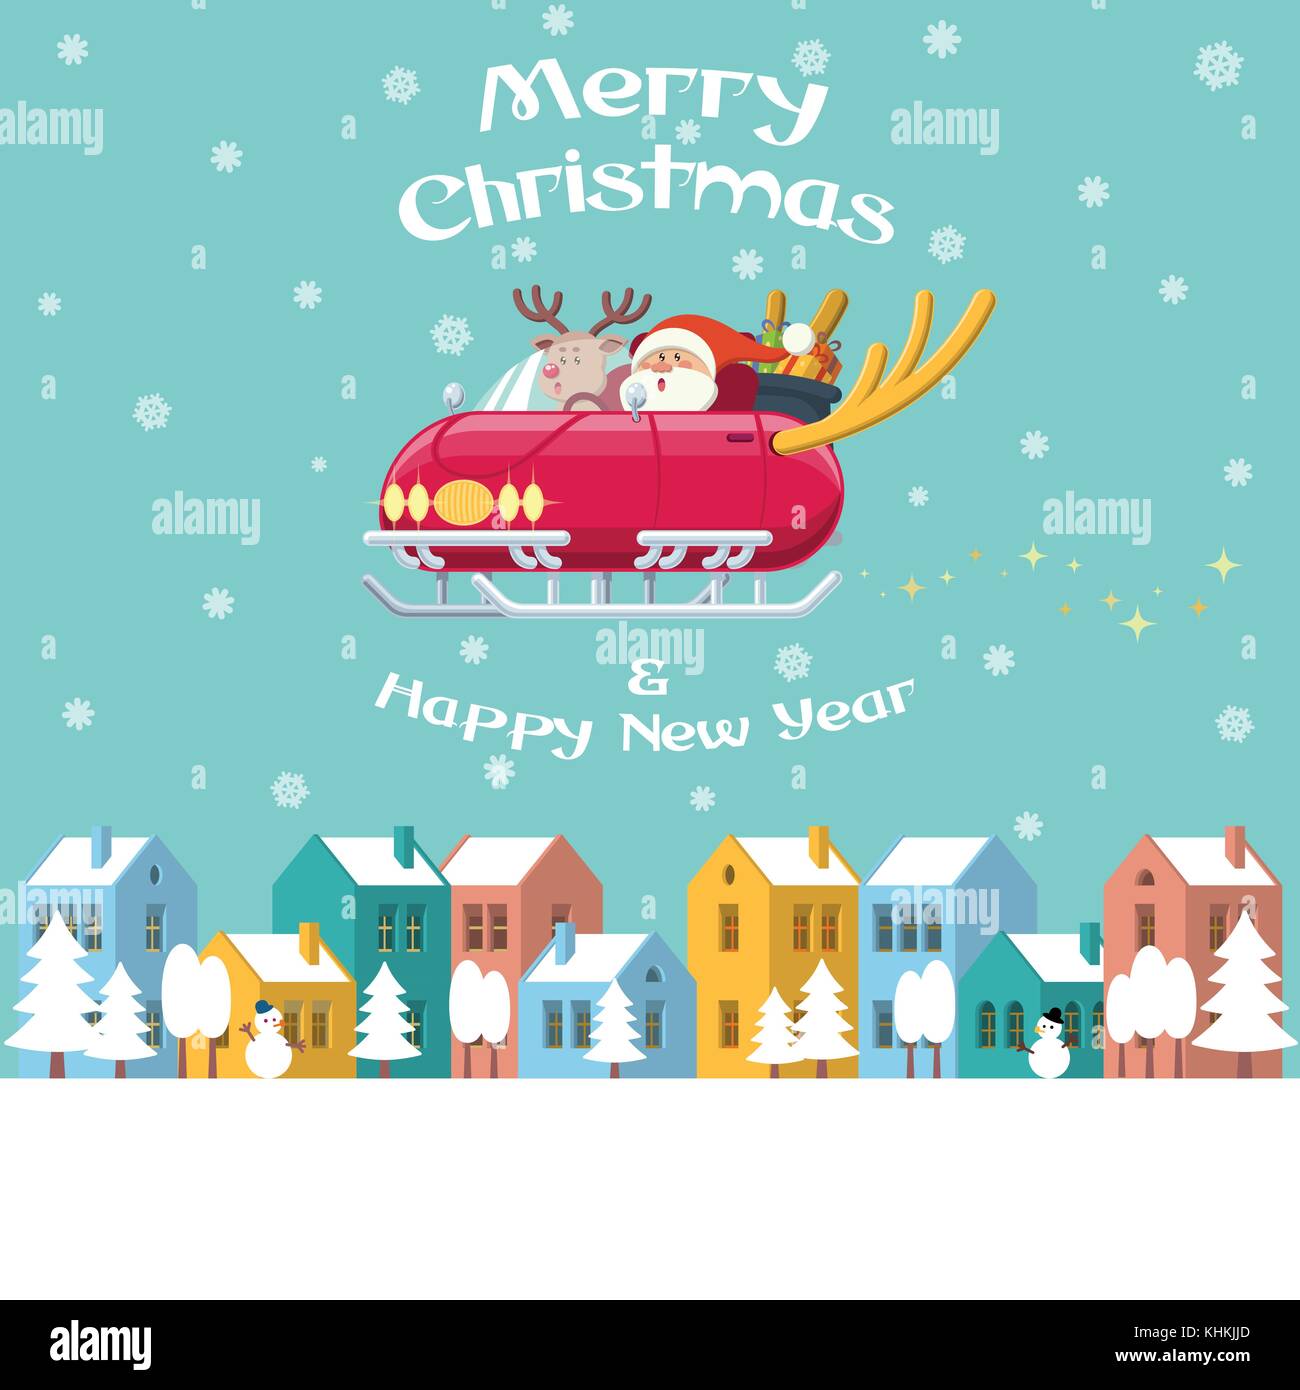 Santa Claus and Rudolph the red nose reindeer driving a shiny sleigh car with deer horns flying over a winter town with colorful buildings, trees, sno Stock Vector